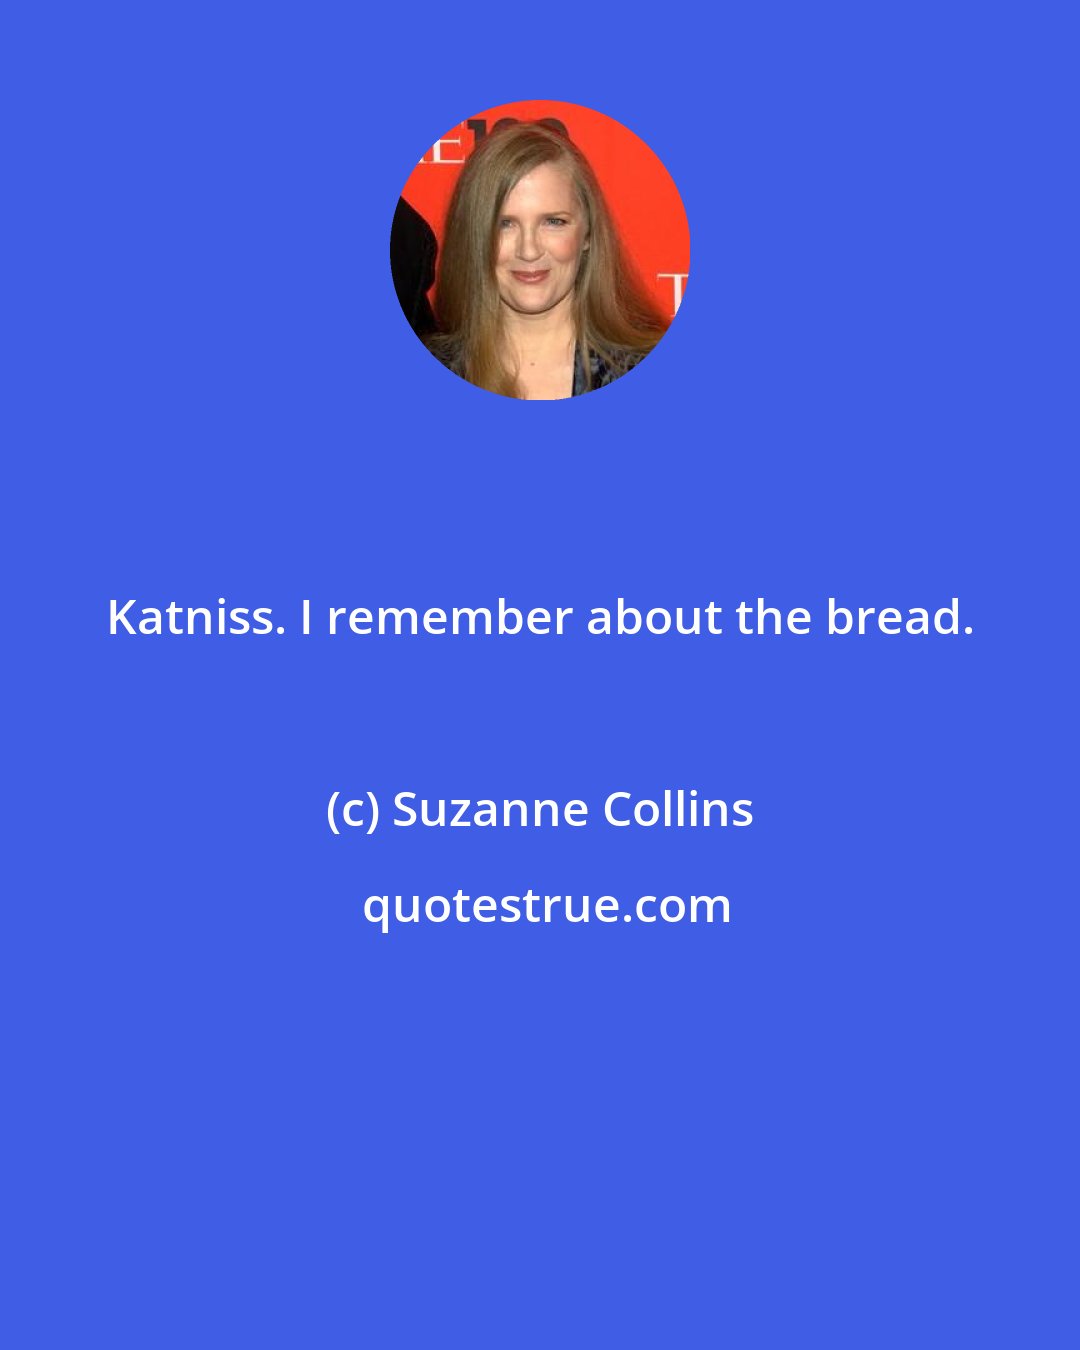 Suzanne Collins: Katniss. I remember about the bread.